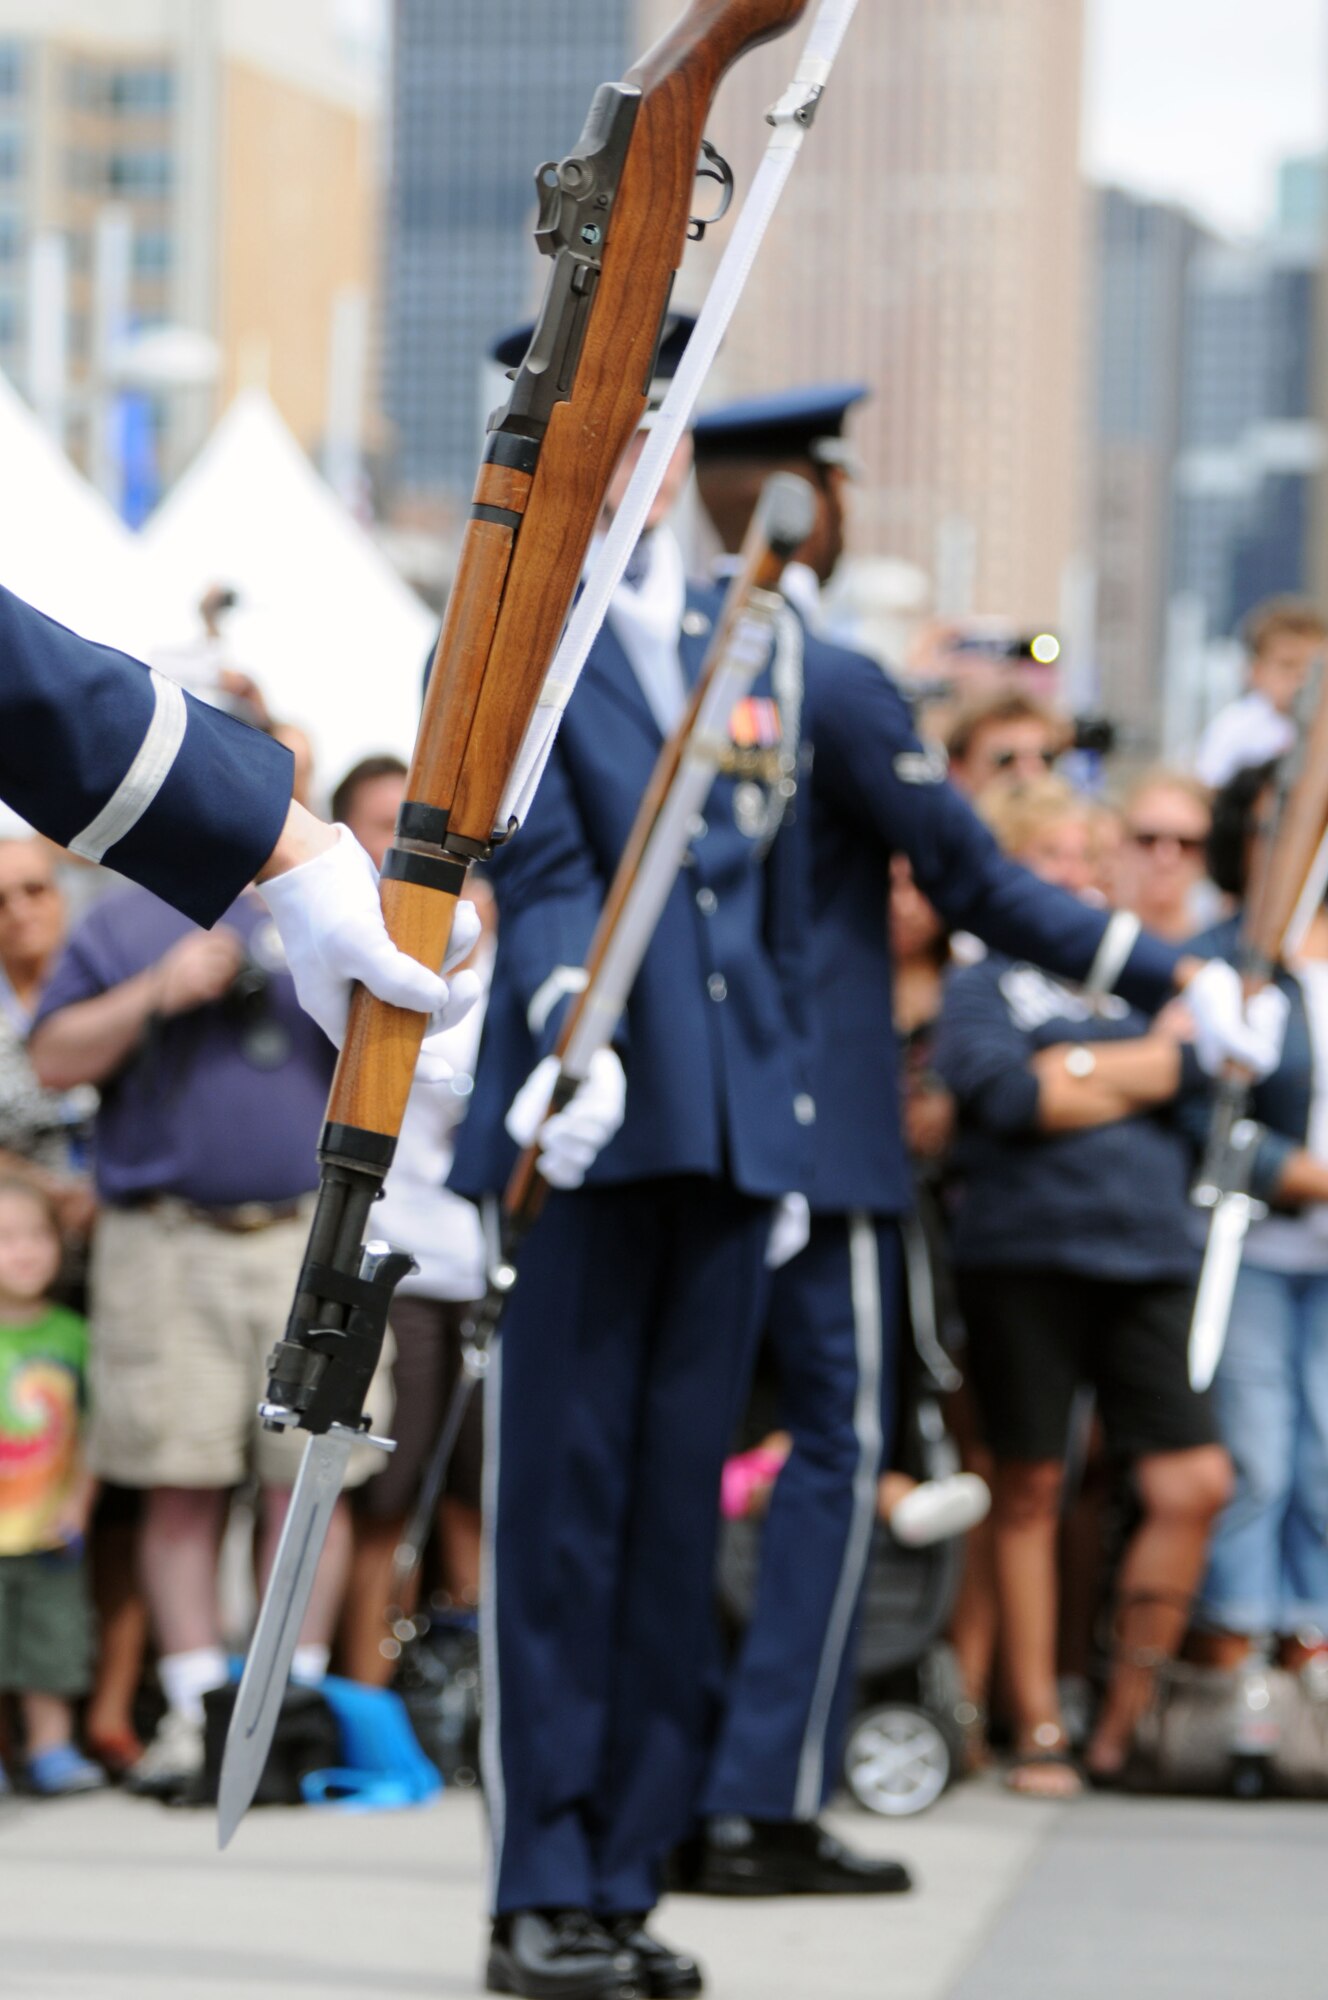 The U.S. Air Force Honor Guard Drill Team hold their M-1 rifles upside down before throwing them in the air Aug. 19 on Pier 86 during Air Force Week in New York, N.Y. The Drill Team promotes the Air Force mission by showcasing drill performances at public and military venues to recruit, retain, and inspire Airmen. (U.S. Air Force photo by Senior Airman Tabitha N. Haynes)